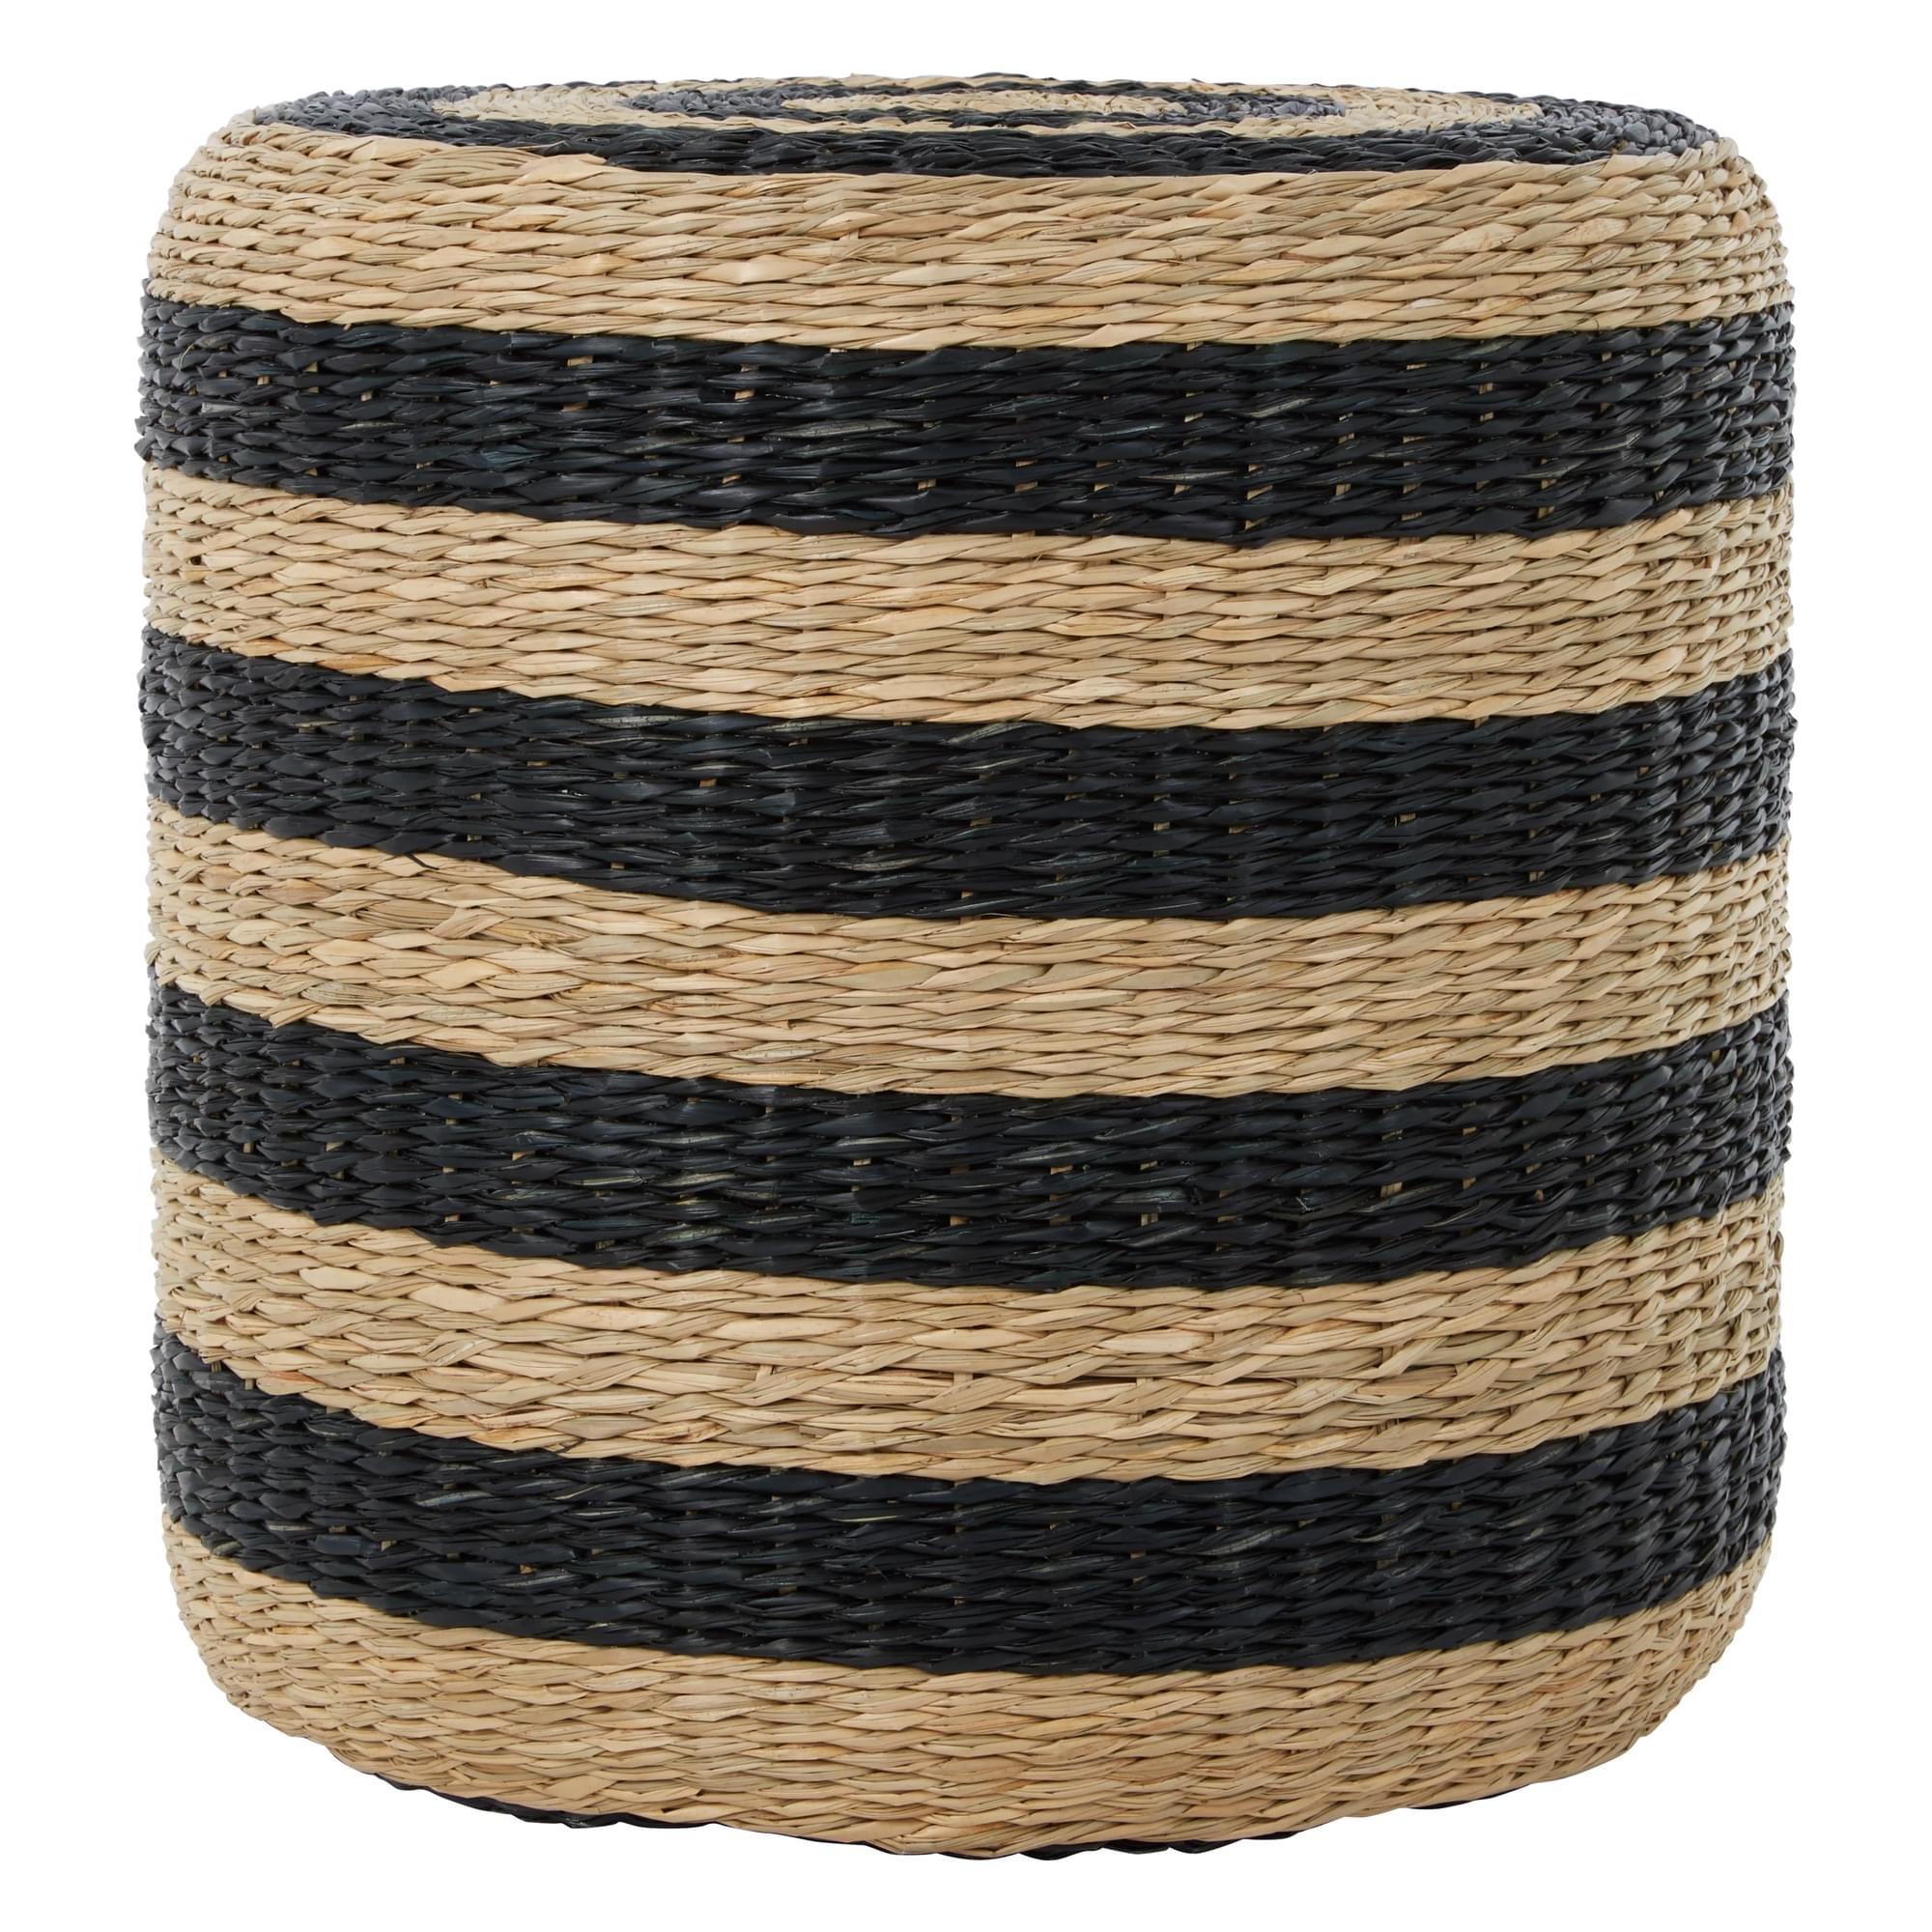 Interiors By Ph Seagrass Pouffe Natural / Black Finish